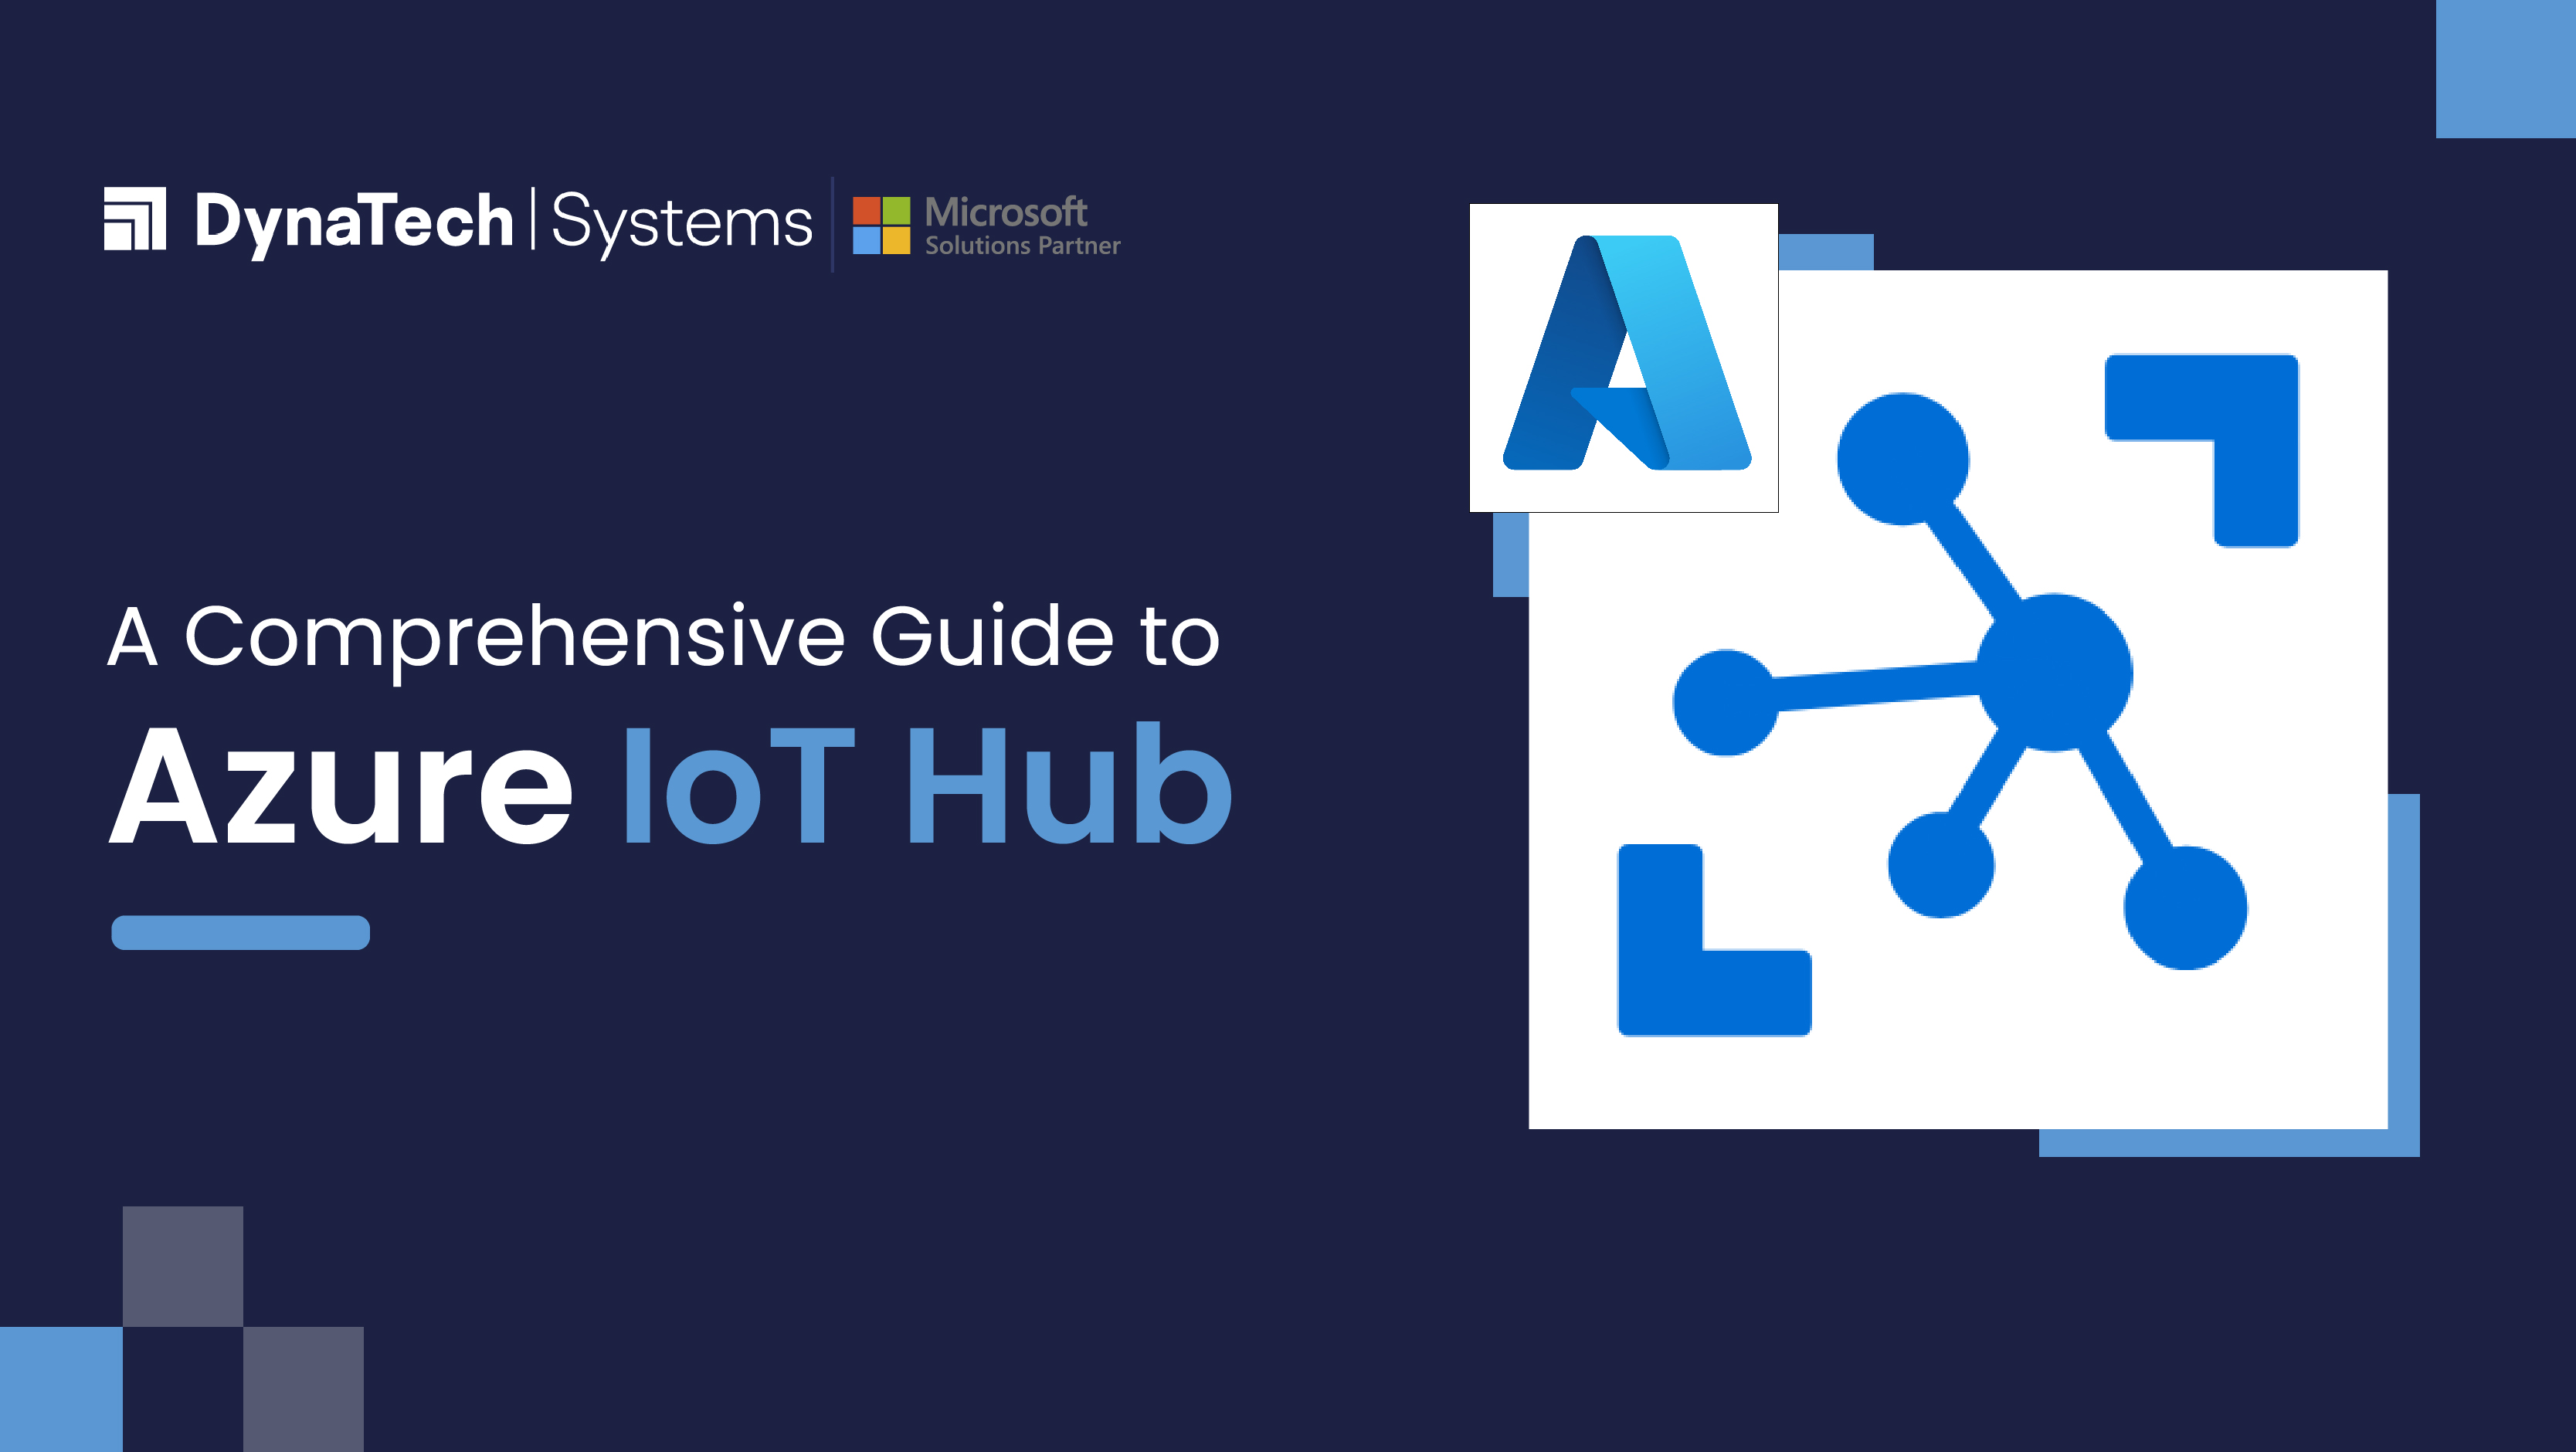 A Comprehensive Guide to Azure IoT Hub